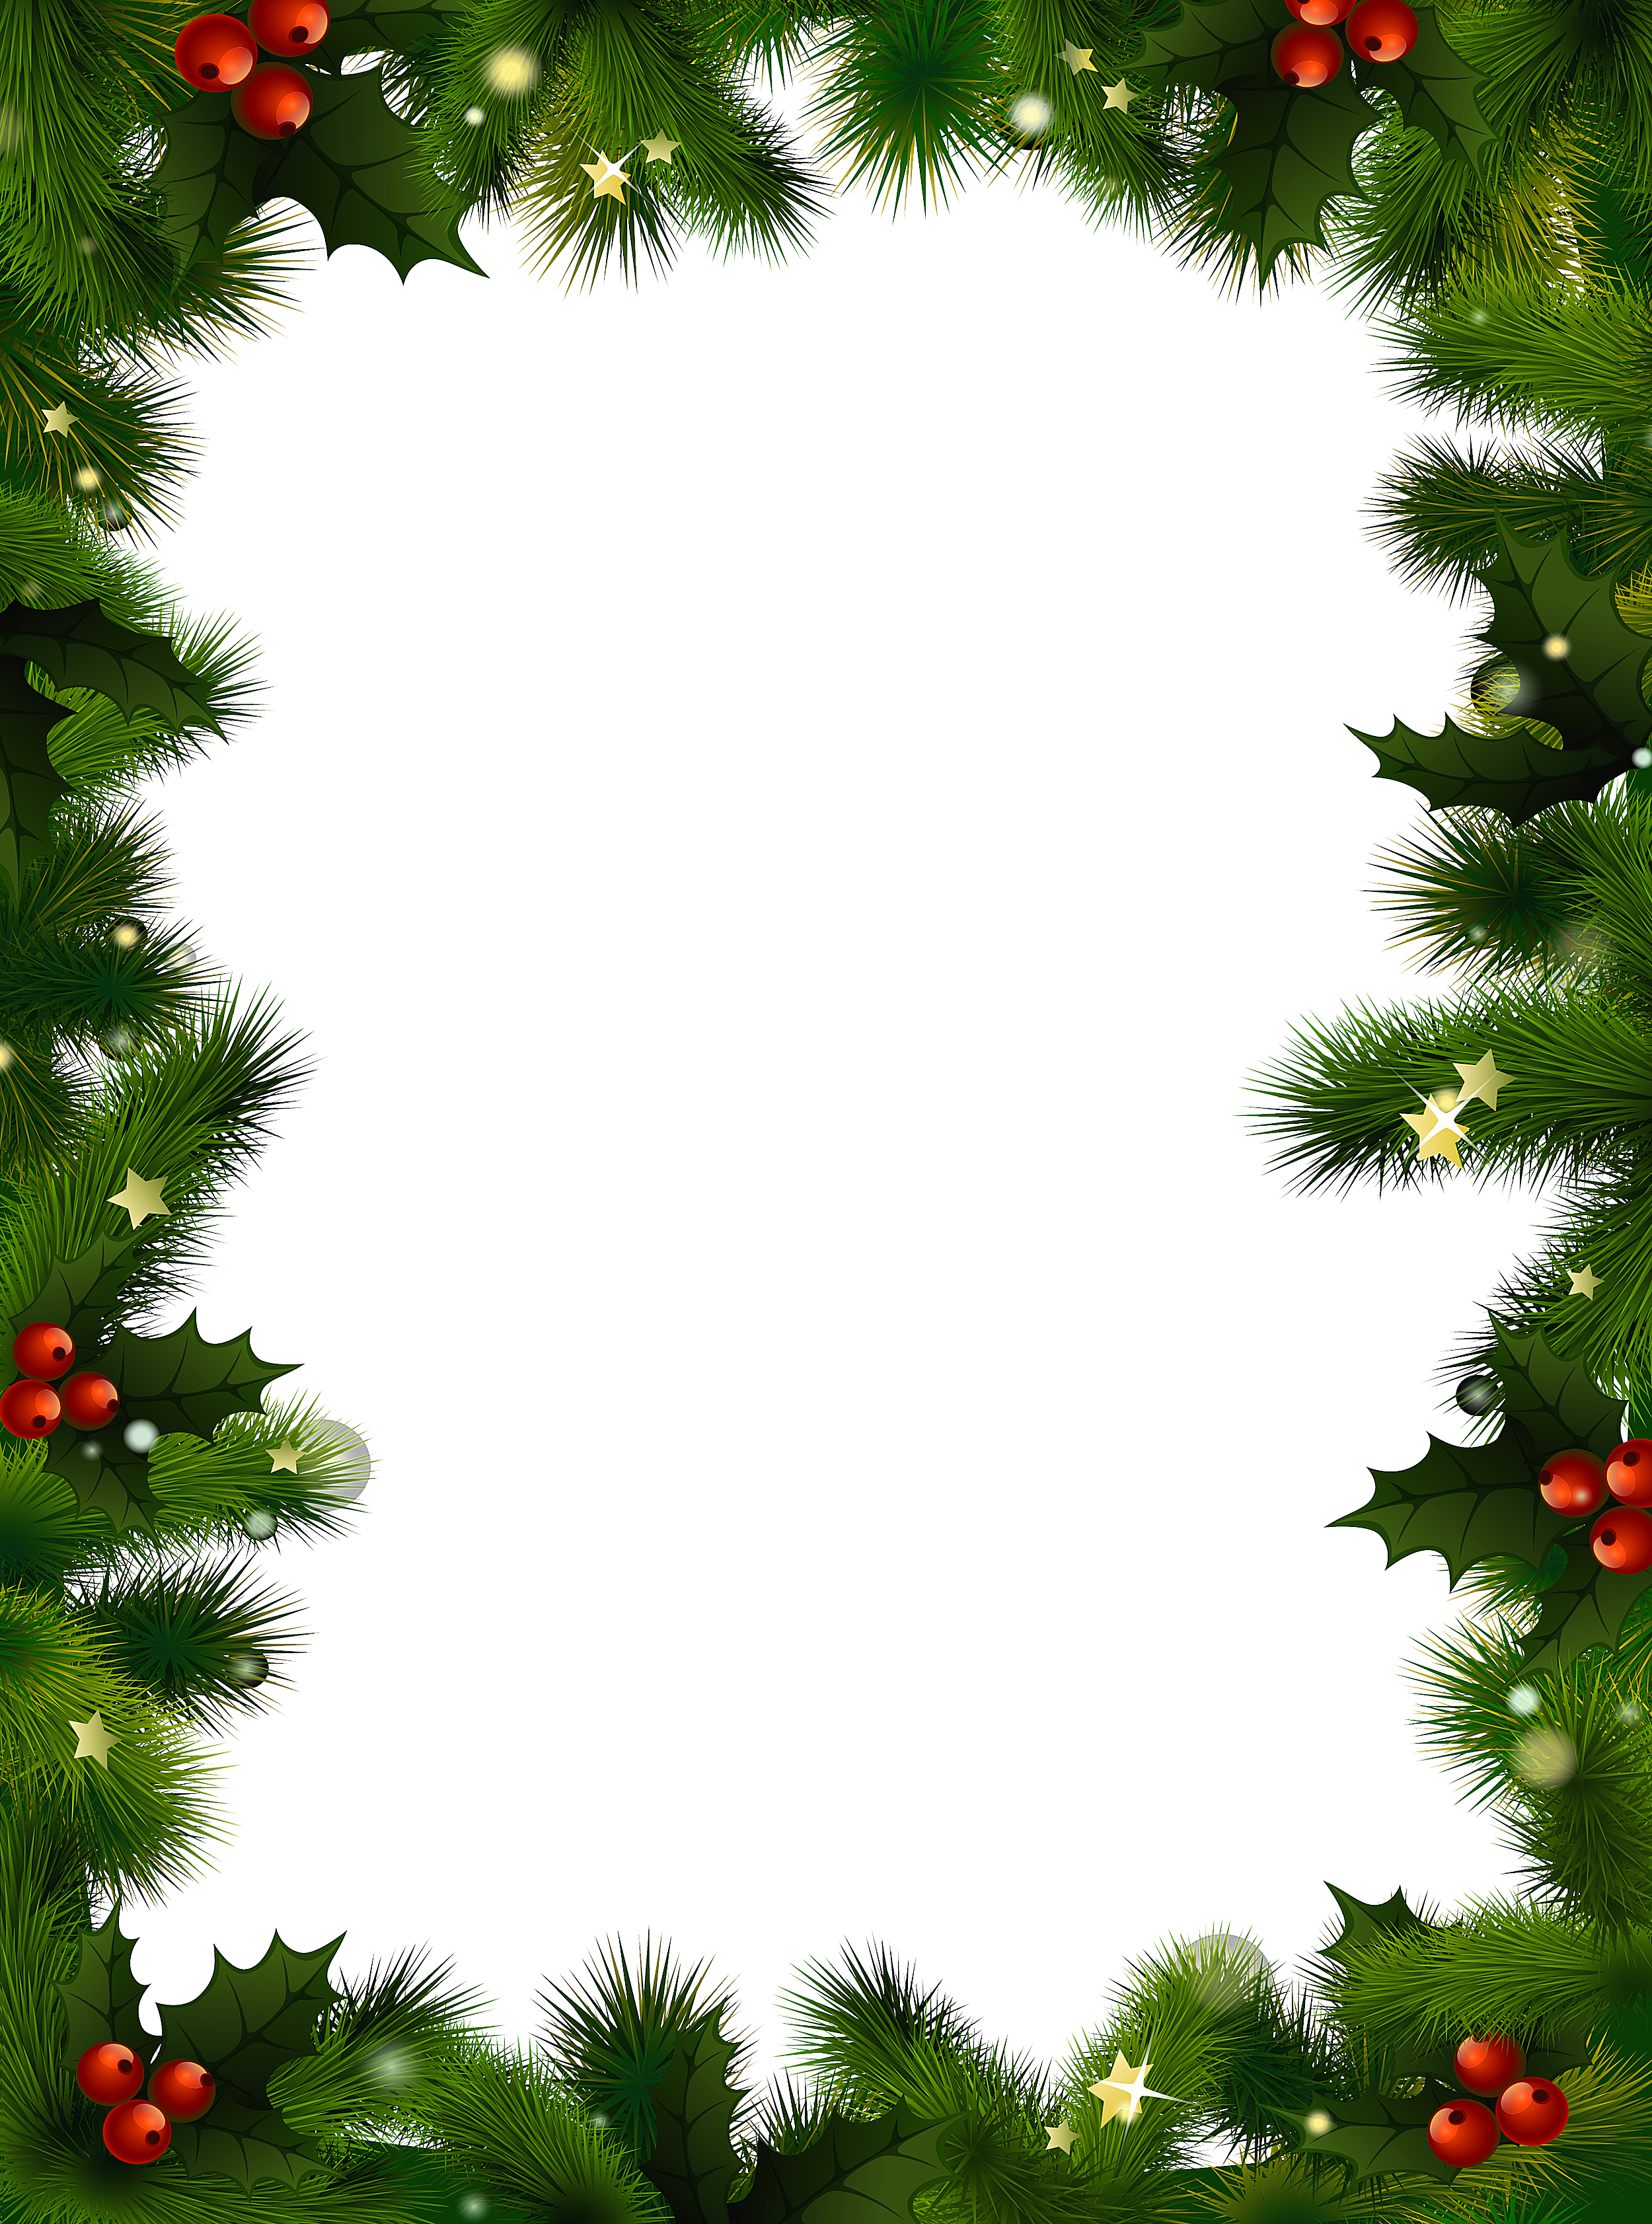  - Free Holiday Clipart Borders